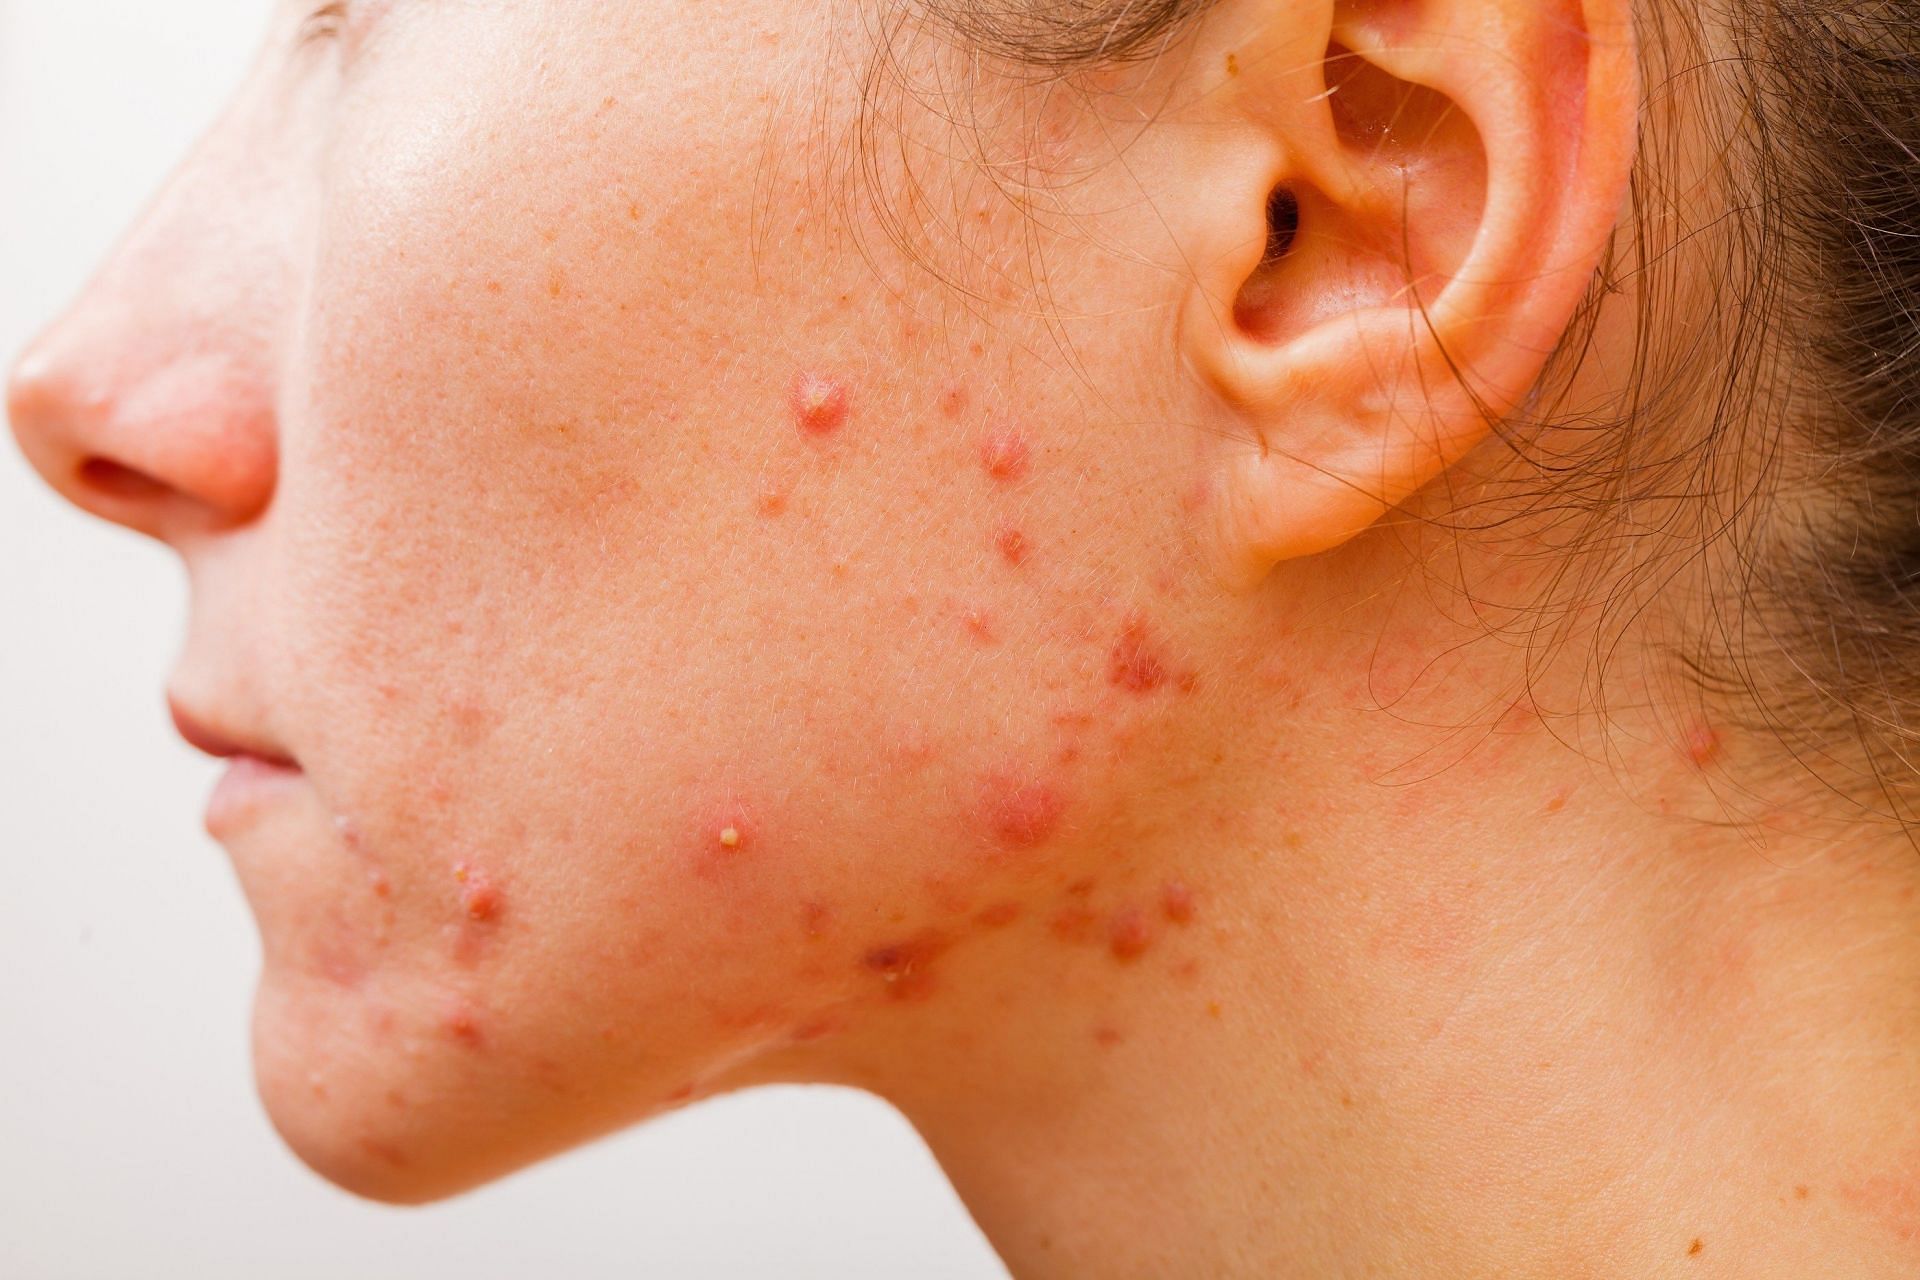 Cystic acne is the most severe form of acne (Image via Flickr)